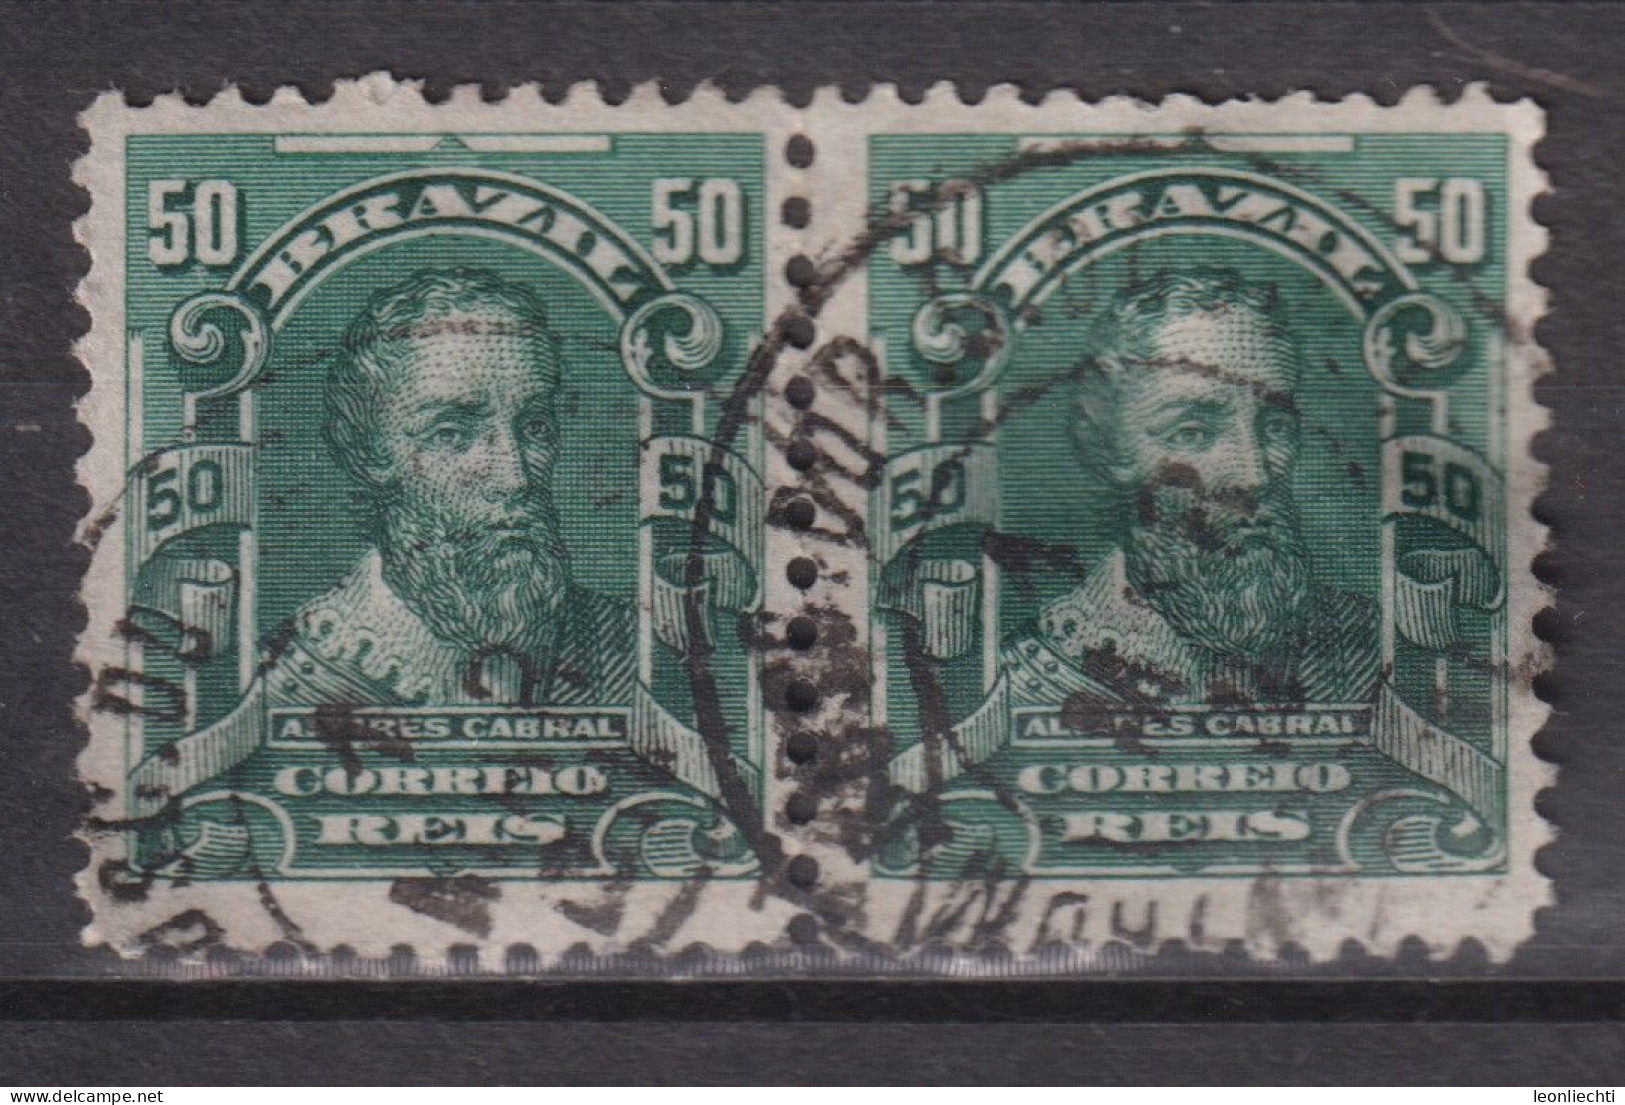 1906 Brasilien Mi:BR 165, Sn:BR 176, Yt:BR 130 Pedro Alvares Cabral (1467-1520), Personalities And Liberty Allegory - Oblitérés